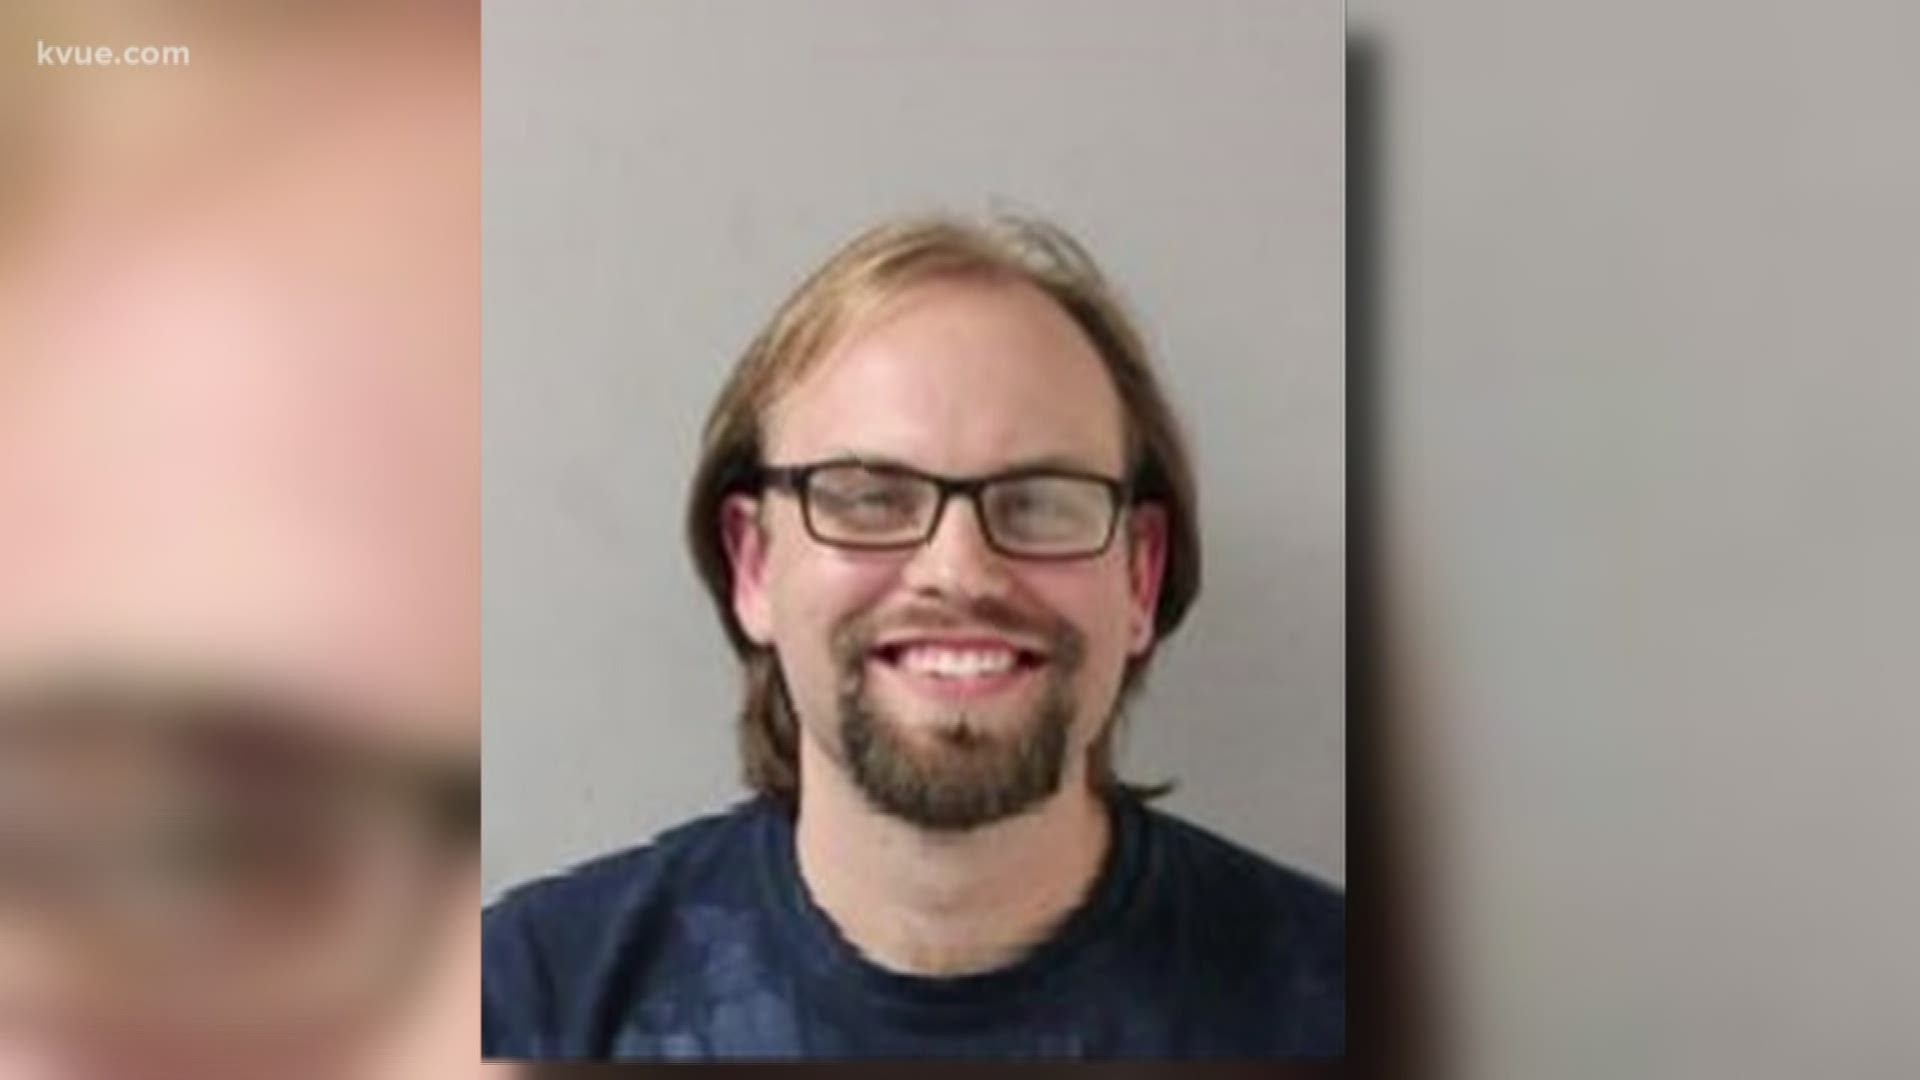 A Texas man who is accused of threatening to rape and kill Taylor Swift worked as a school bus driver, a letter from the school district said.